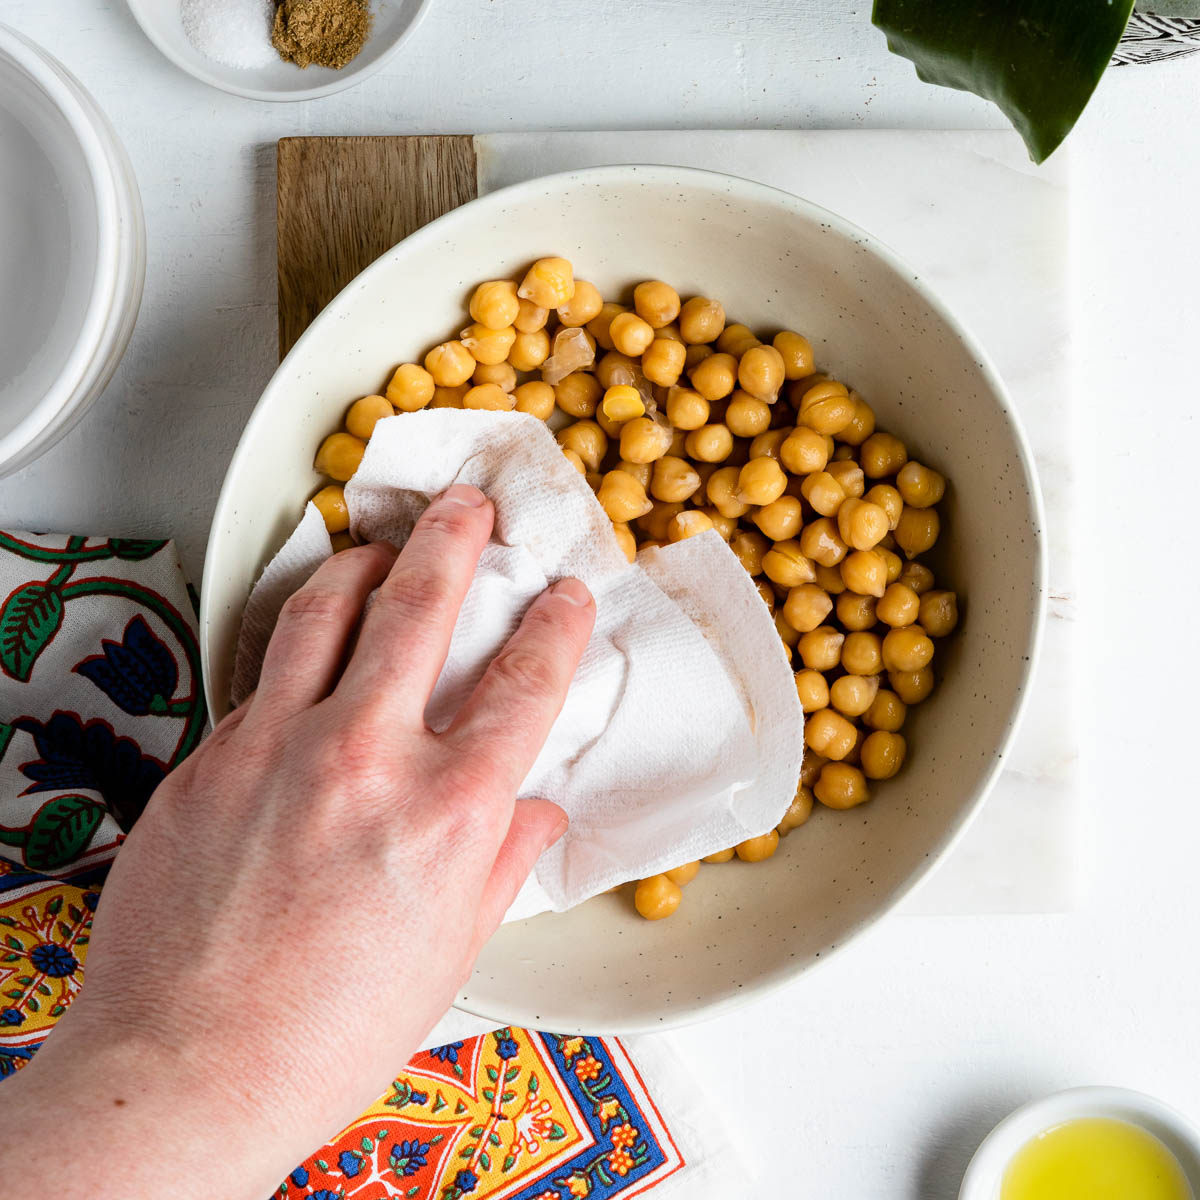 white hand using a paper towel to dry a bowl of chickpeas.